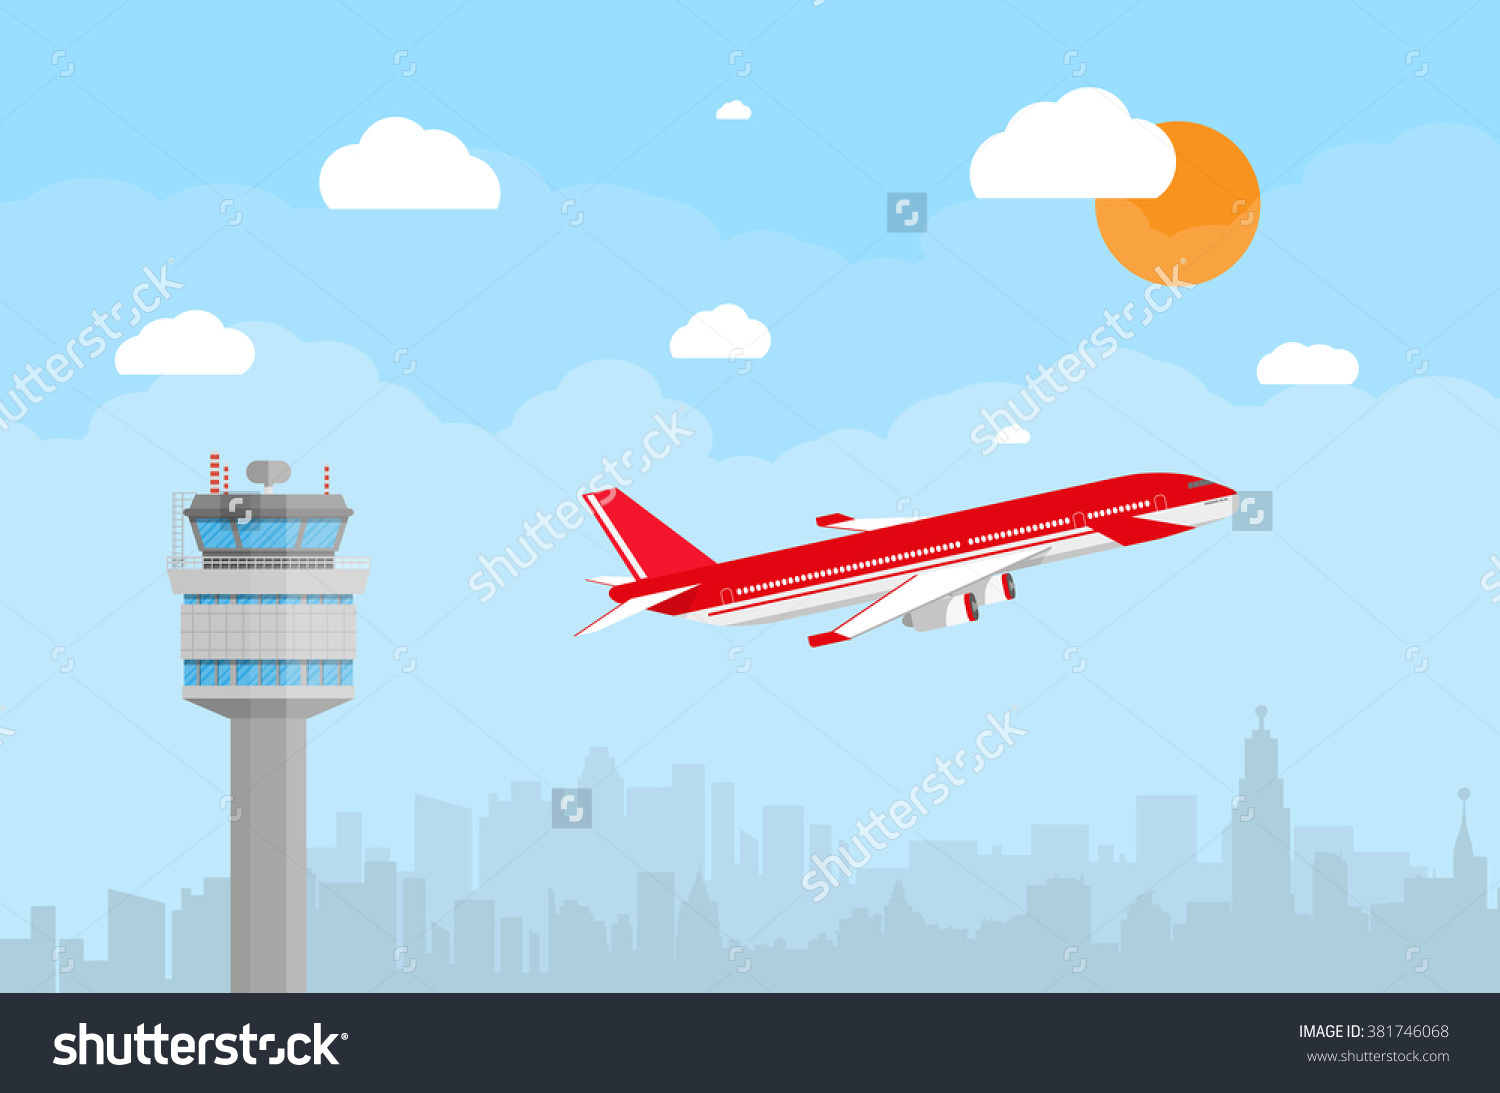 airport clipart - photo #18